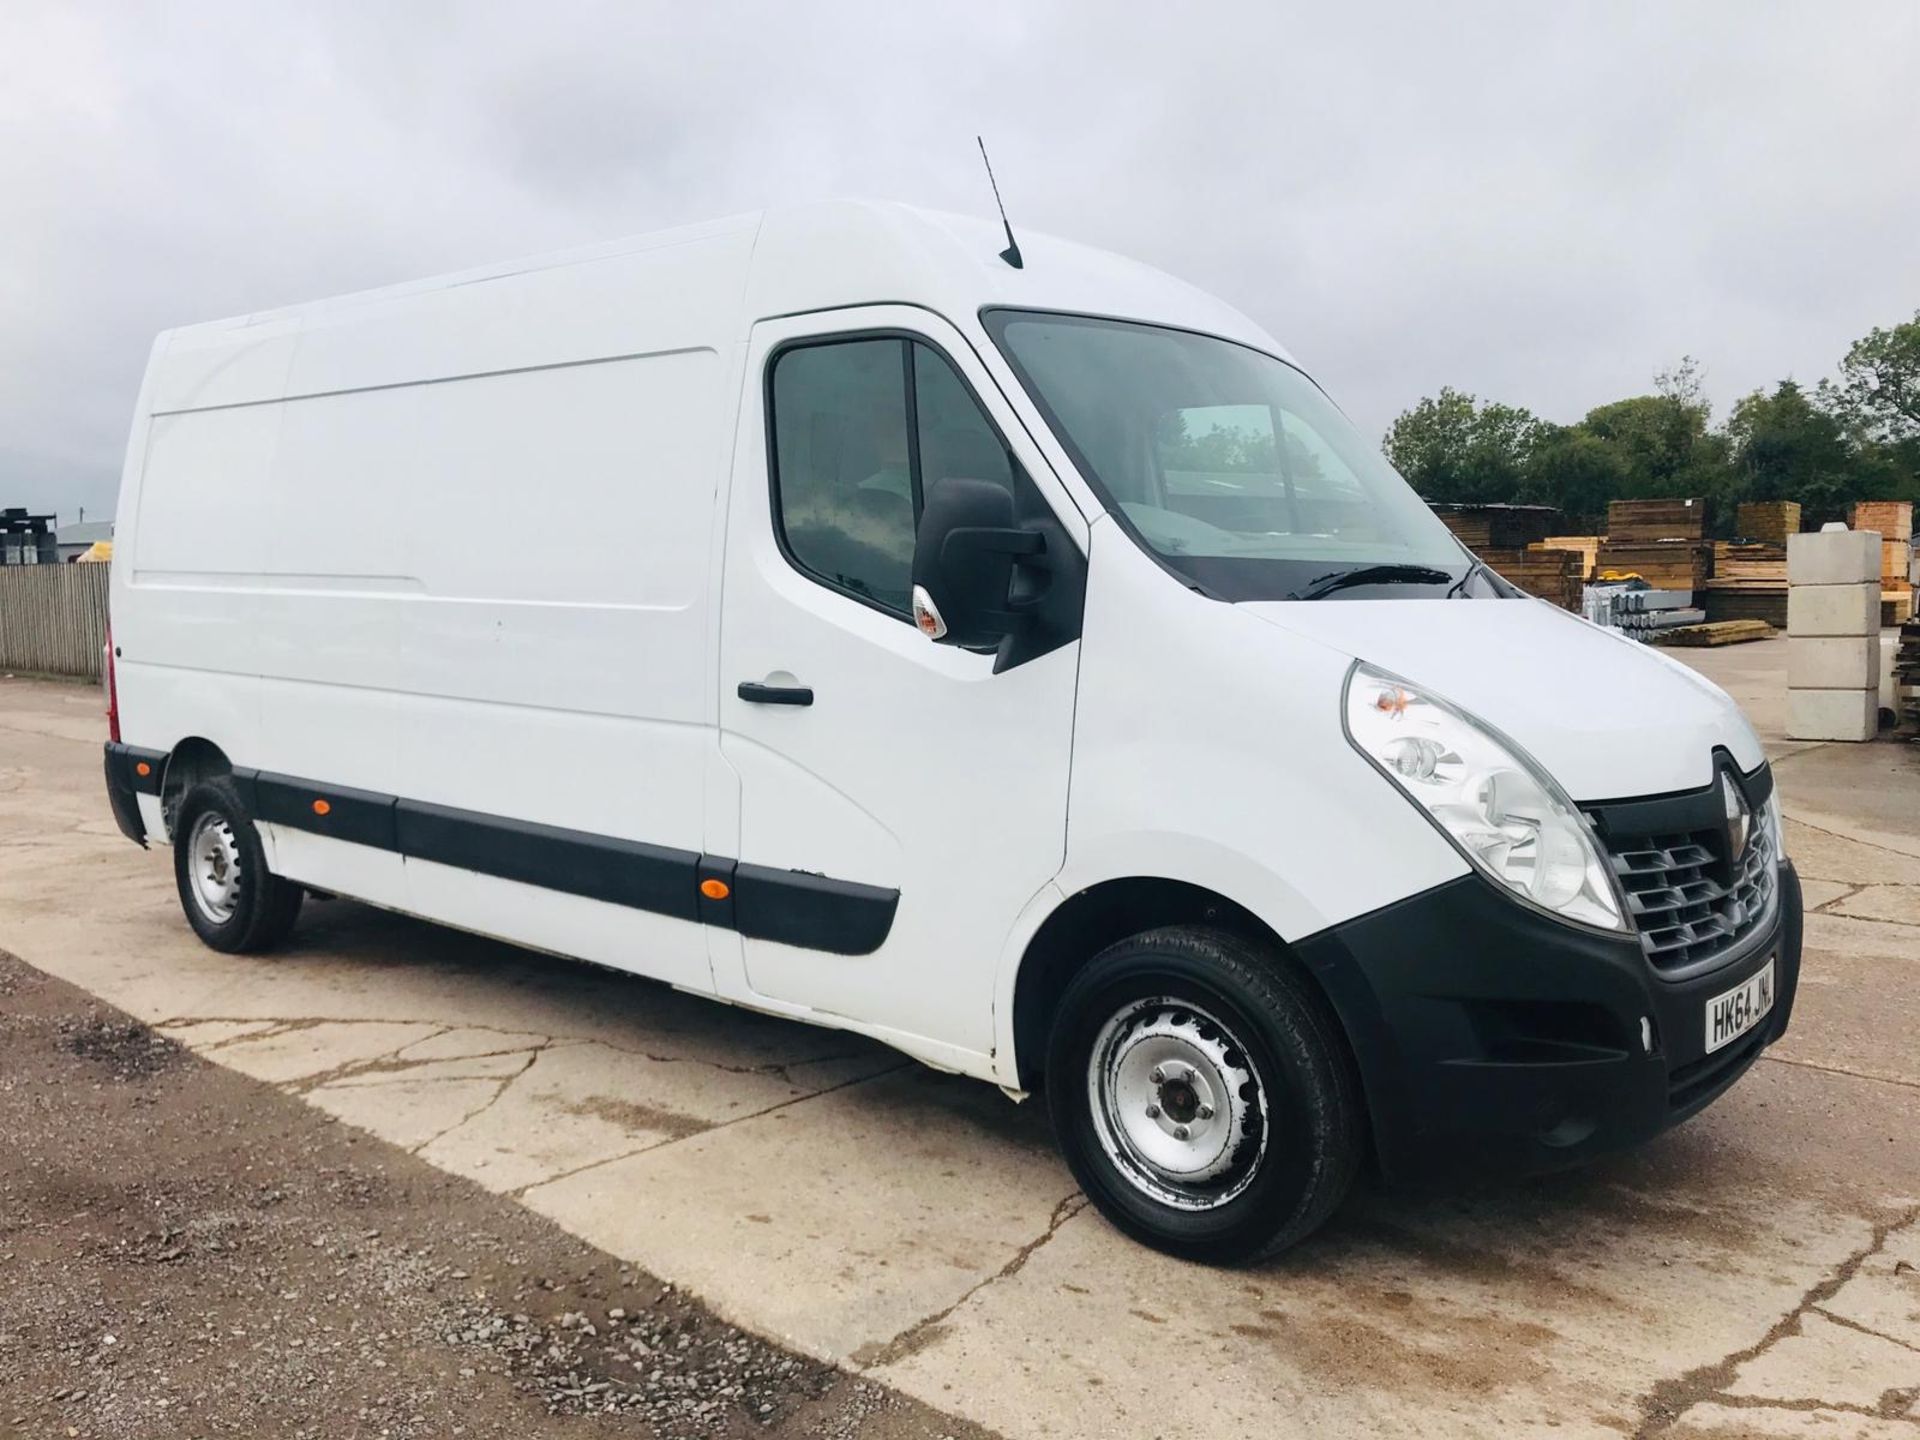 On Sale RENAULT MASTER *BUSINESS EDITION* LWB HI-ROOF (2015 MODEL) '2.3 DCI - 125 BHP - 6 SPEED' - Image 8 of 19